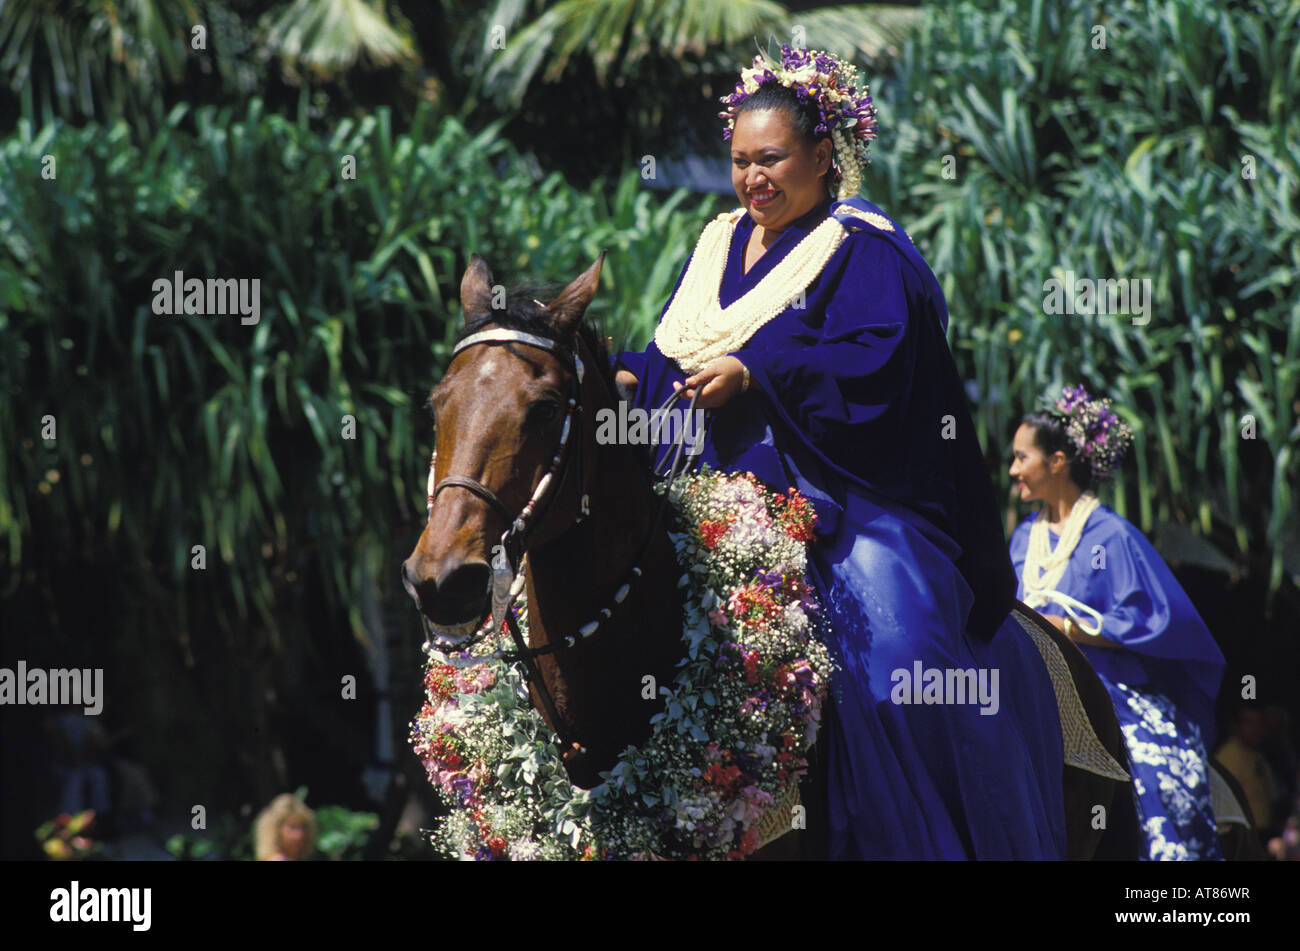 Pa'u rider in the annual Aloha Festivals Parade rides a floral-bedecked horse. Her attire is one continuous piece of fabric, Stock Photo